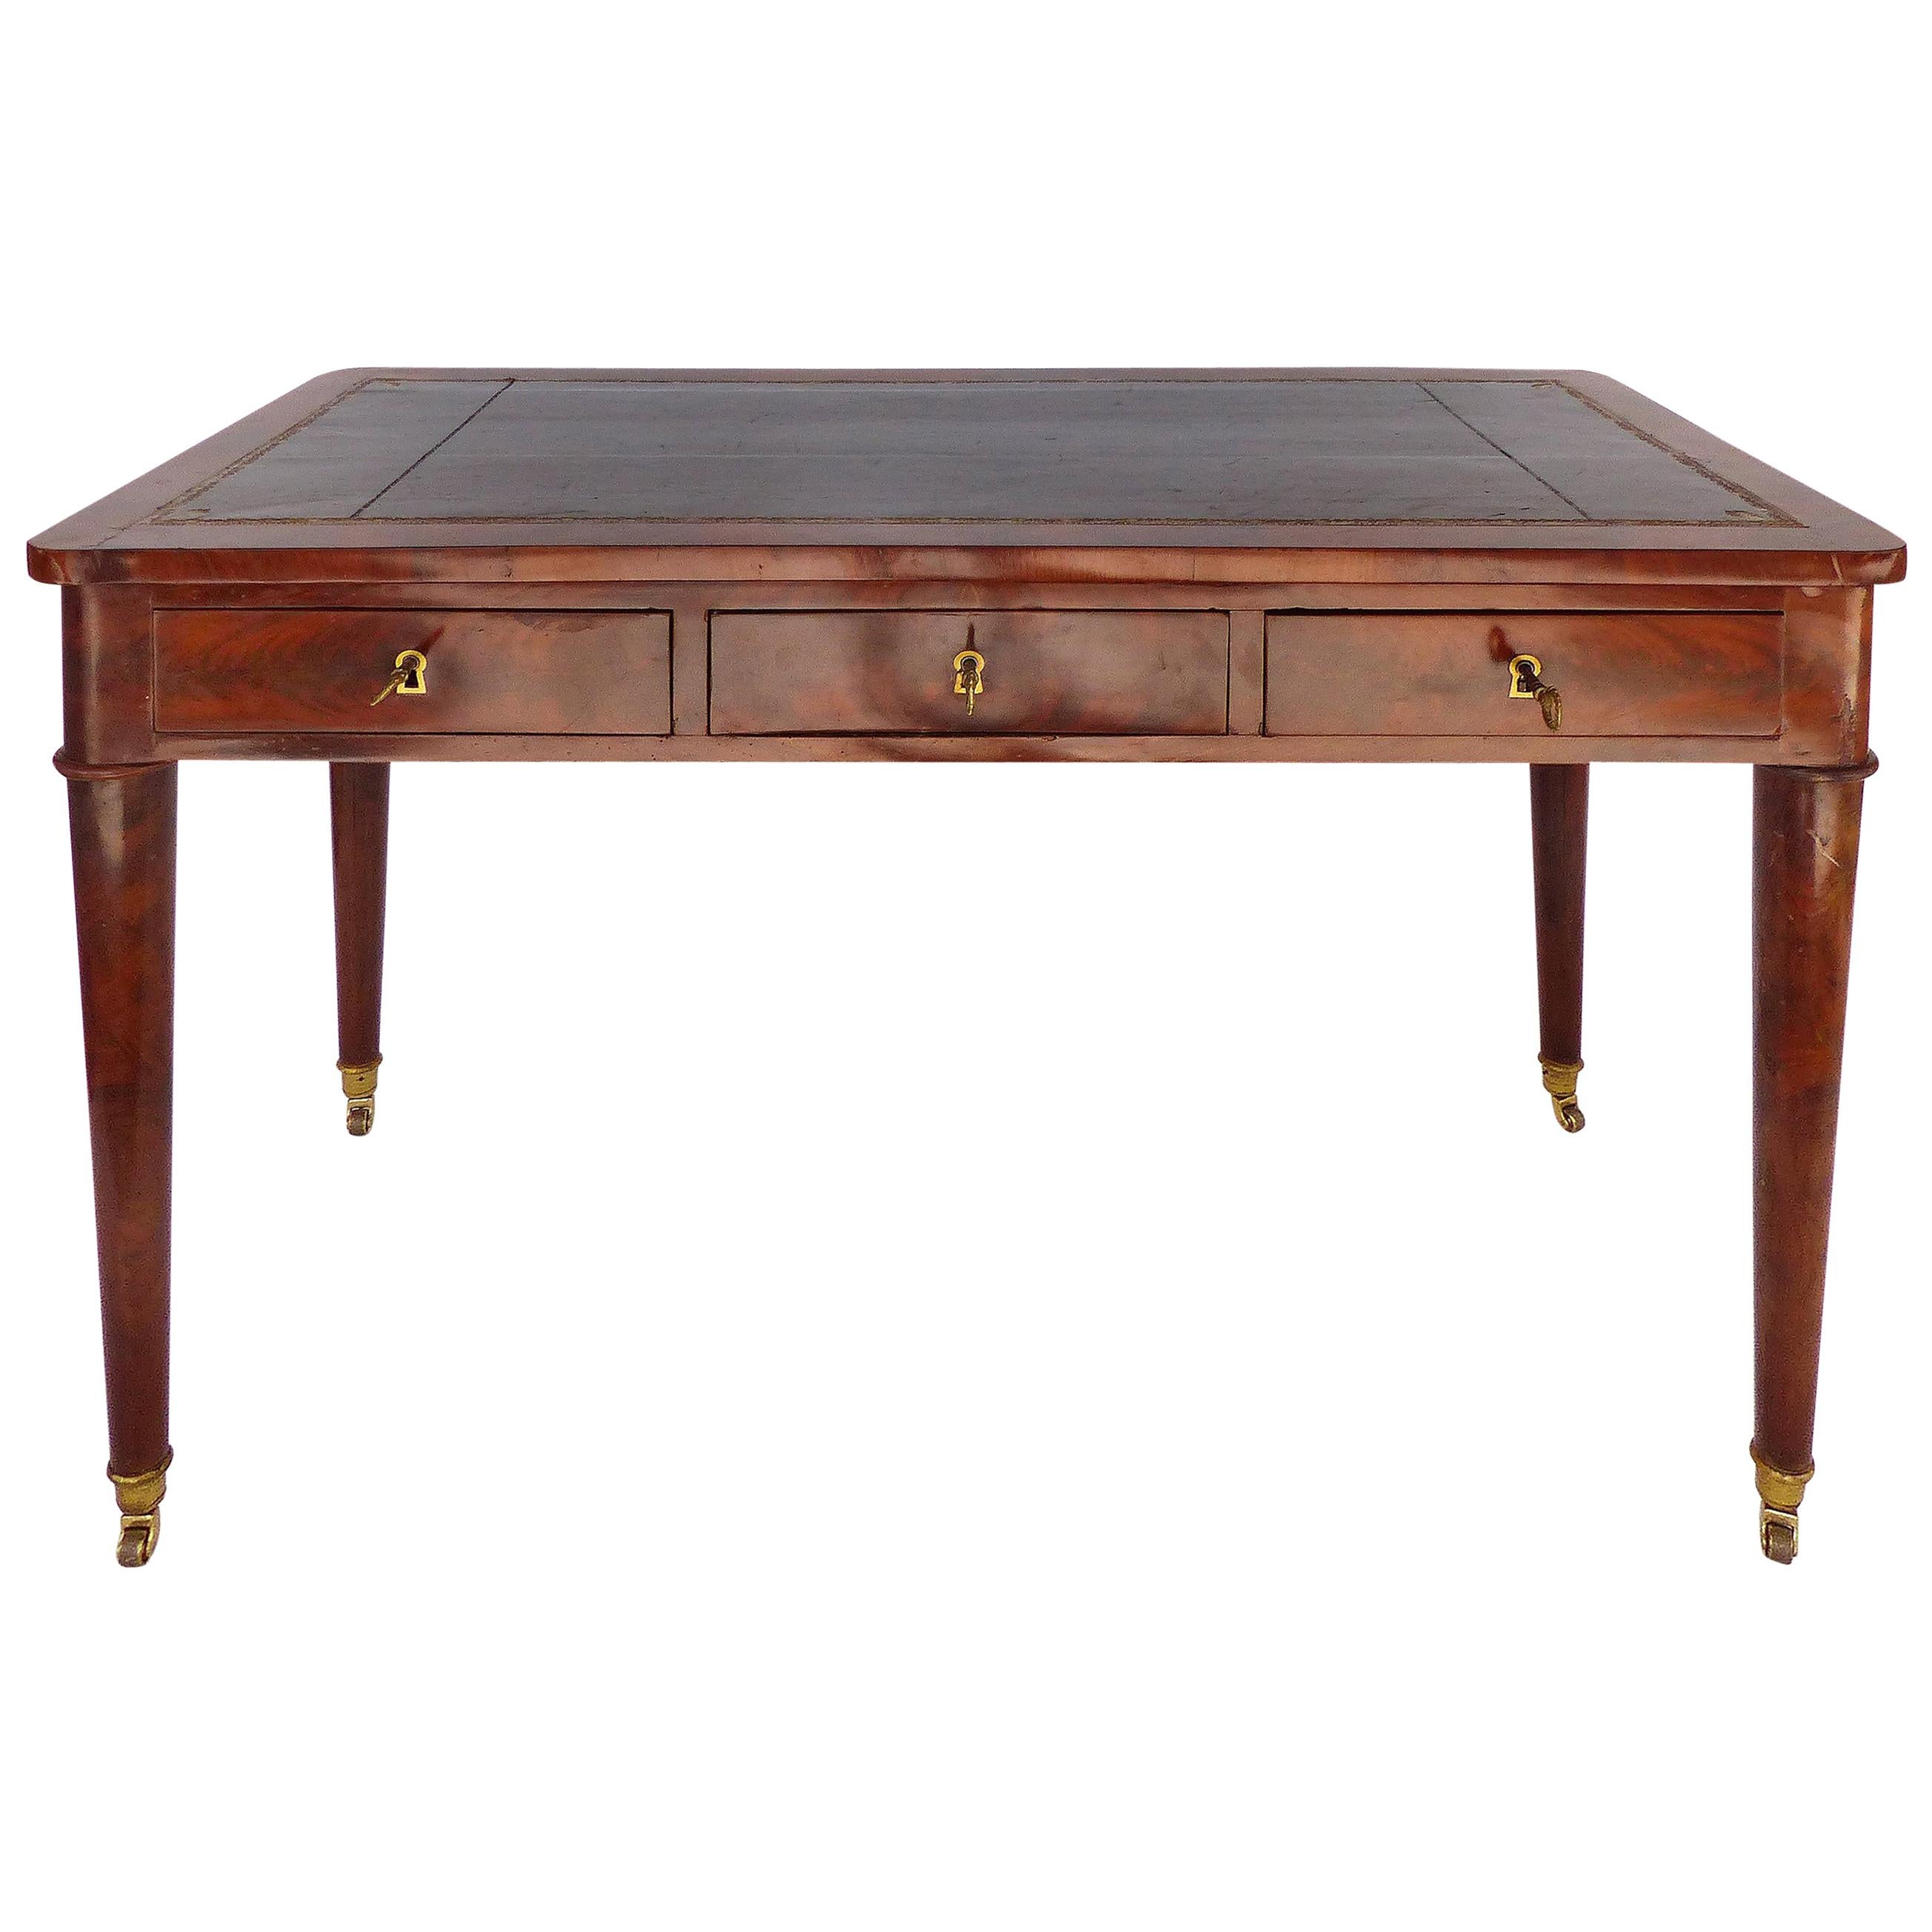 19th-Century Mahogany Writing Desk with Tapering Legs and Embossed Leather Top